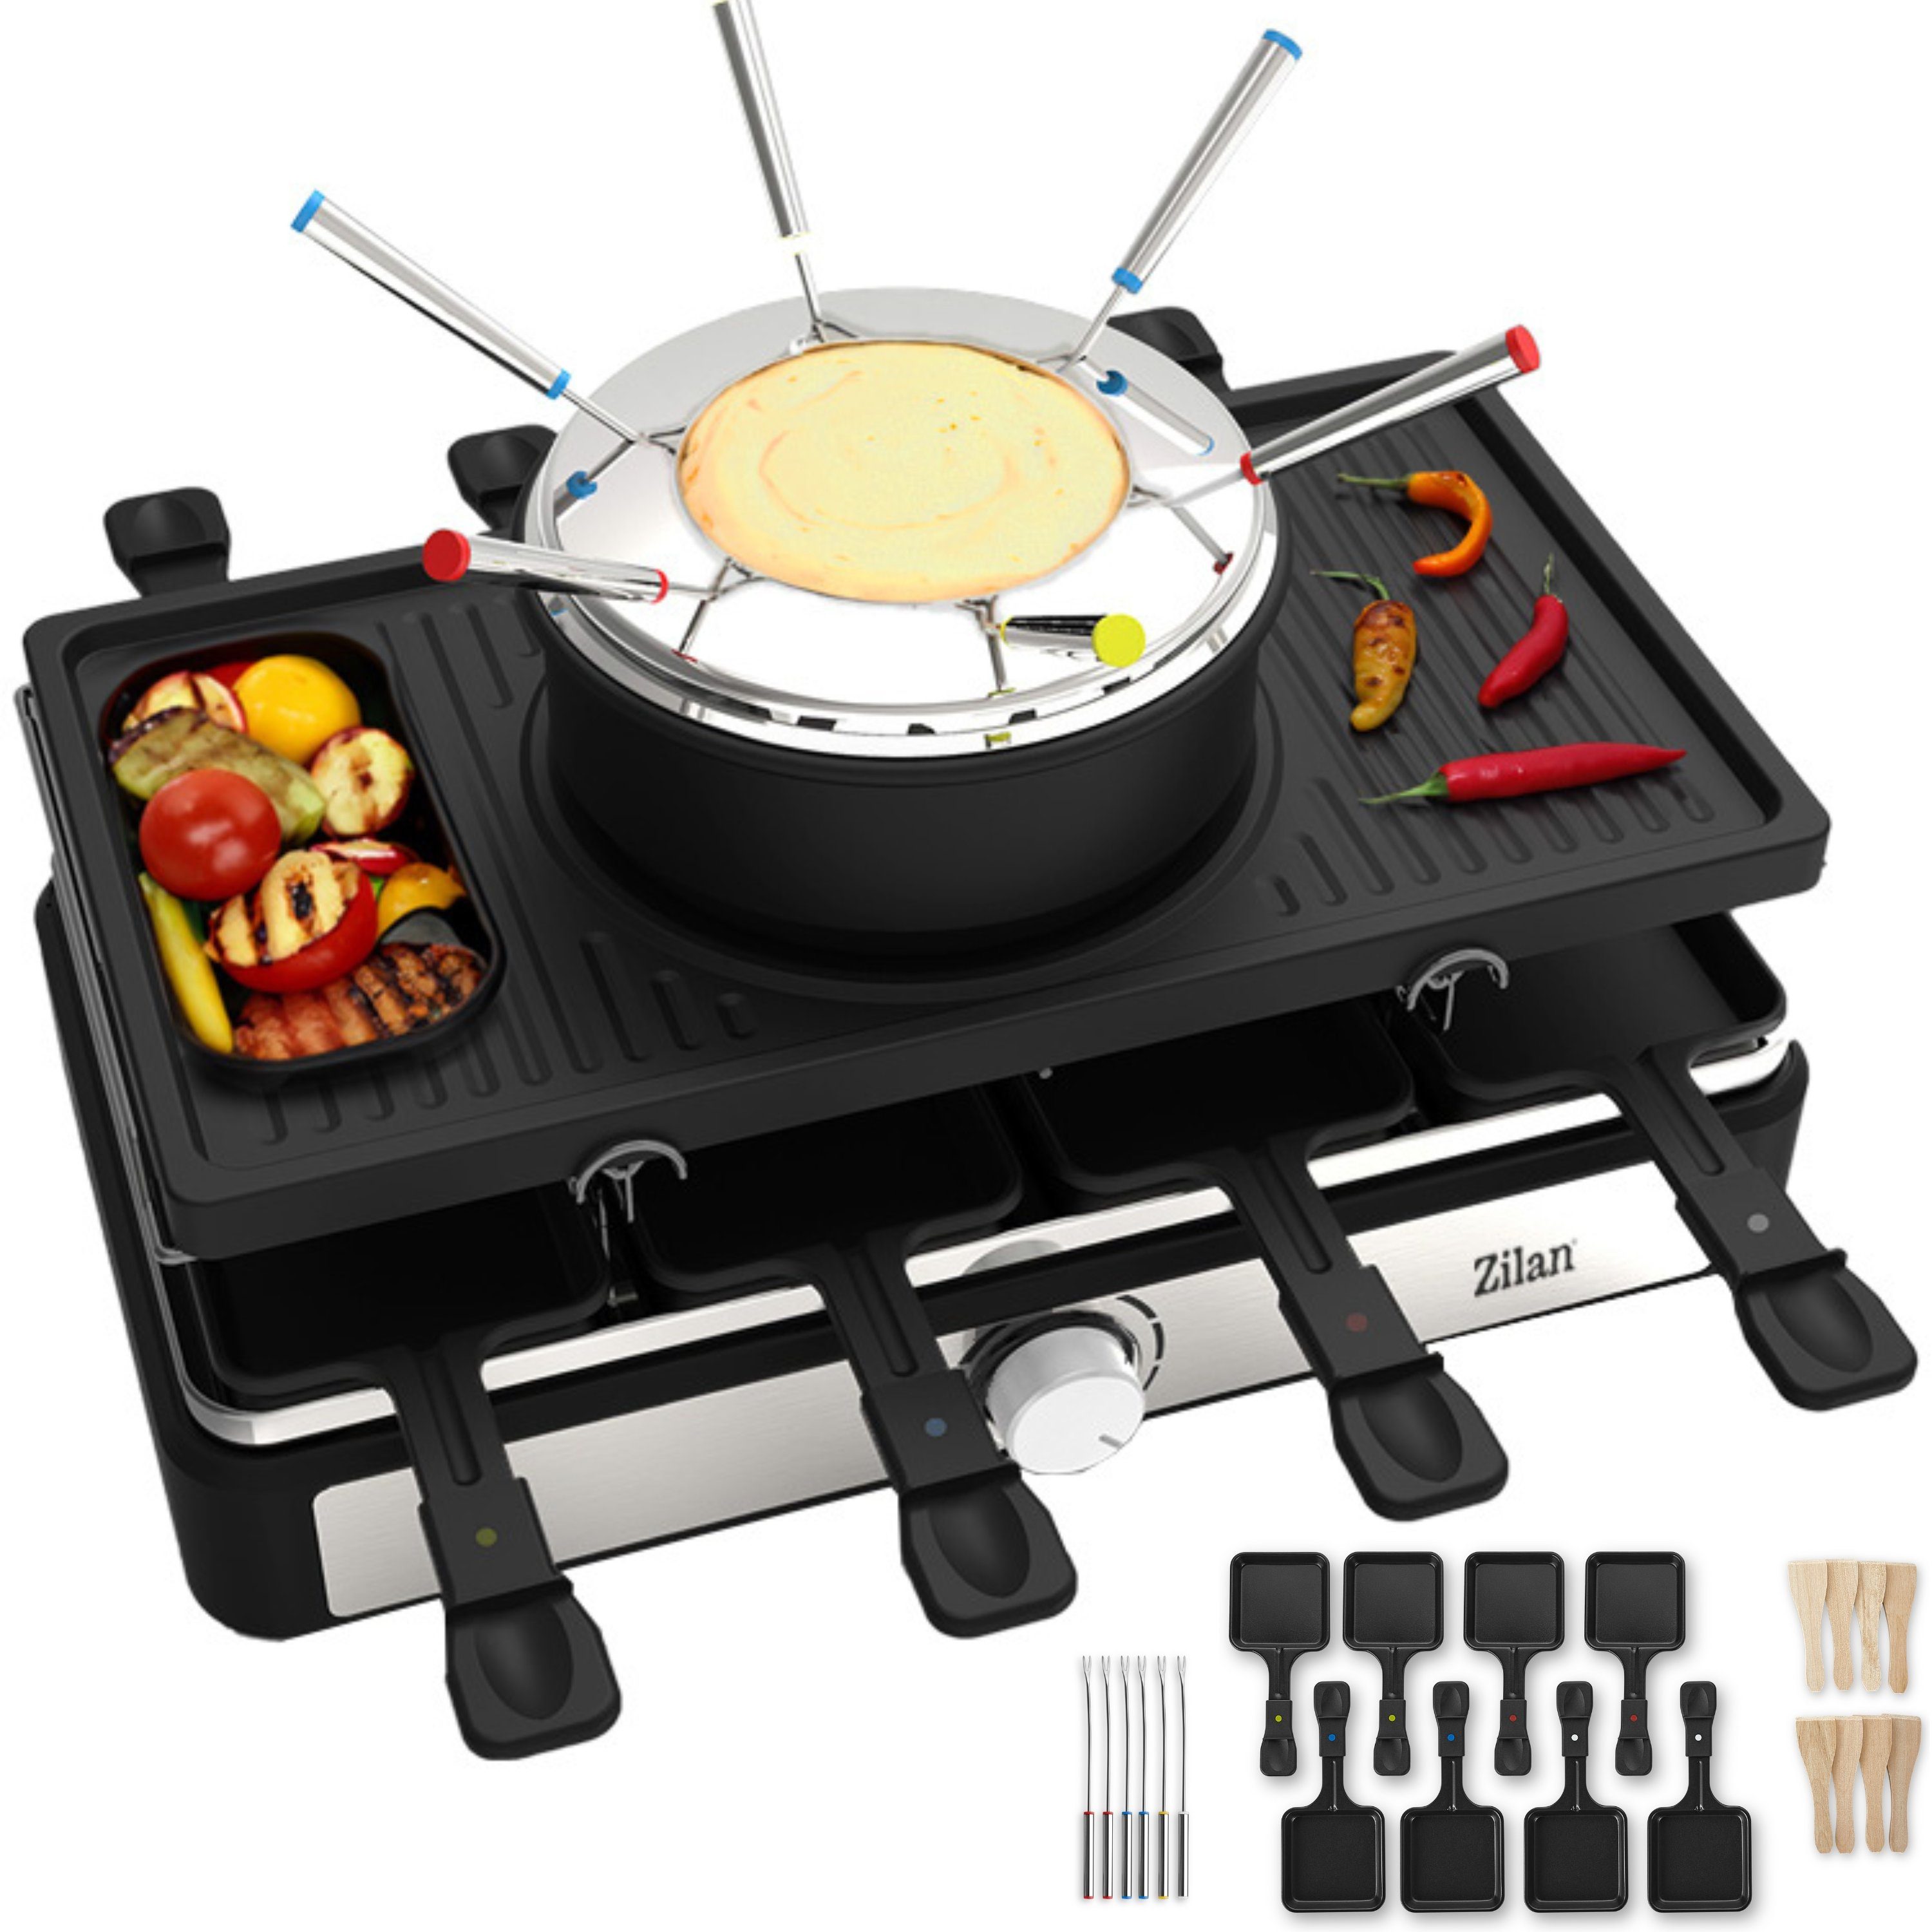 kaufen » Raclettes Raclette-Grills online OTTO |